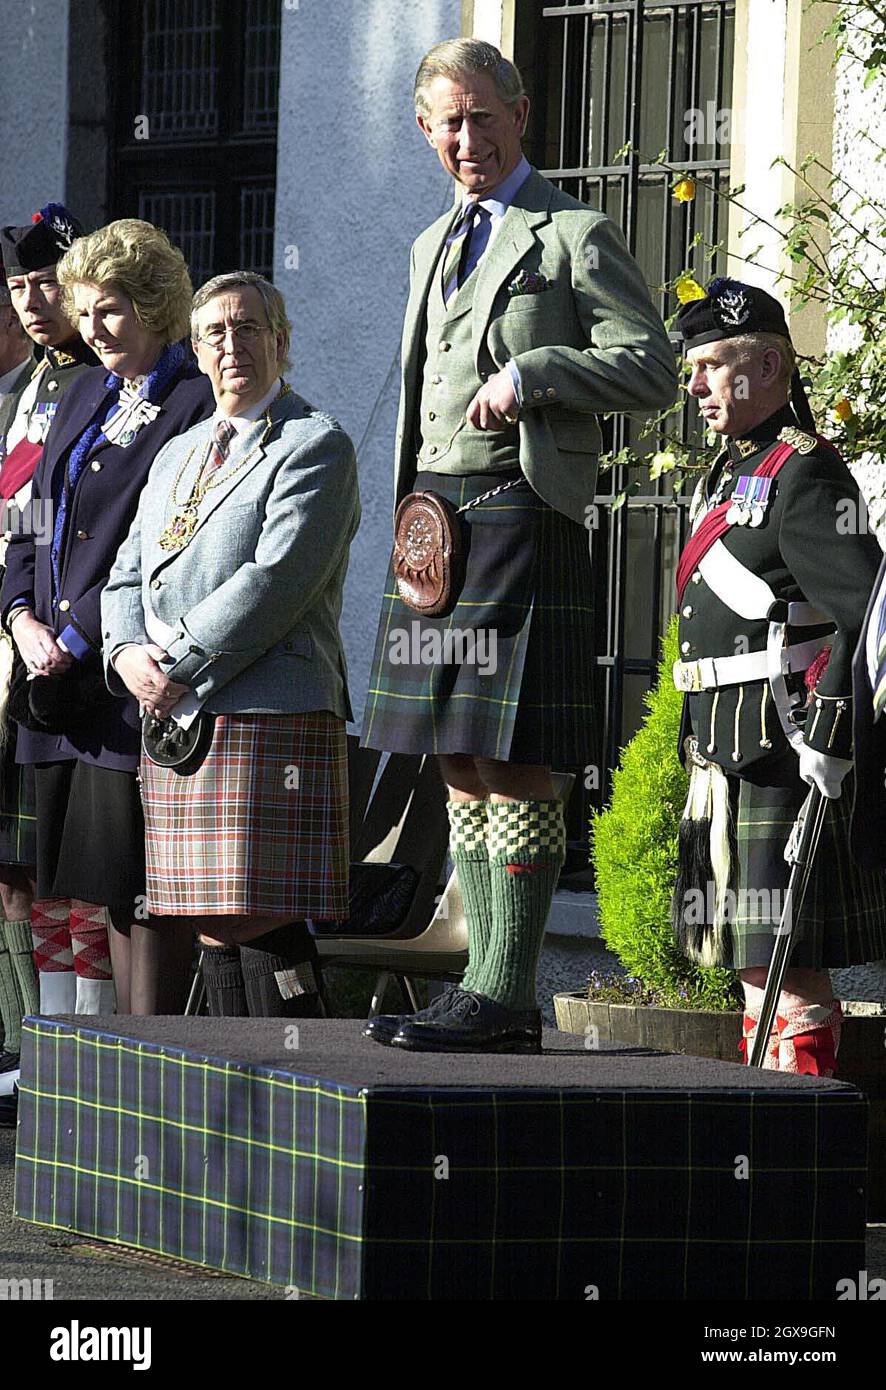 The Prince Of Wales, the Duke of Rothesay, at the Gordon Highlanders Museum in Aberdeen where he views a parade during a ceremony  to lay up the Regiment's last colours.  Â©Anwar Hussein/allactiondigital.com  Stock Photo